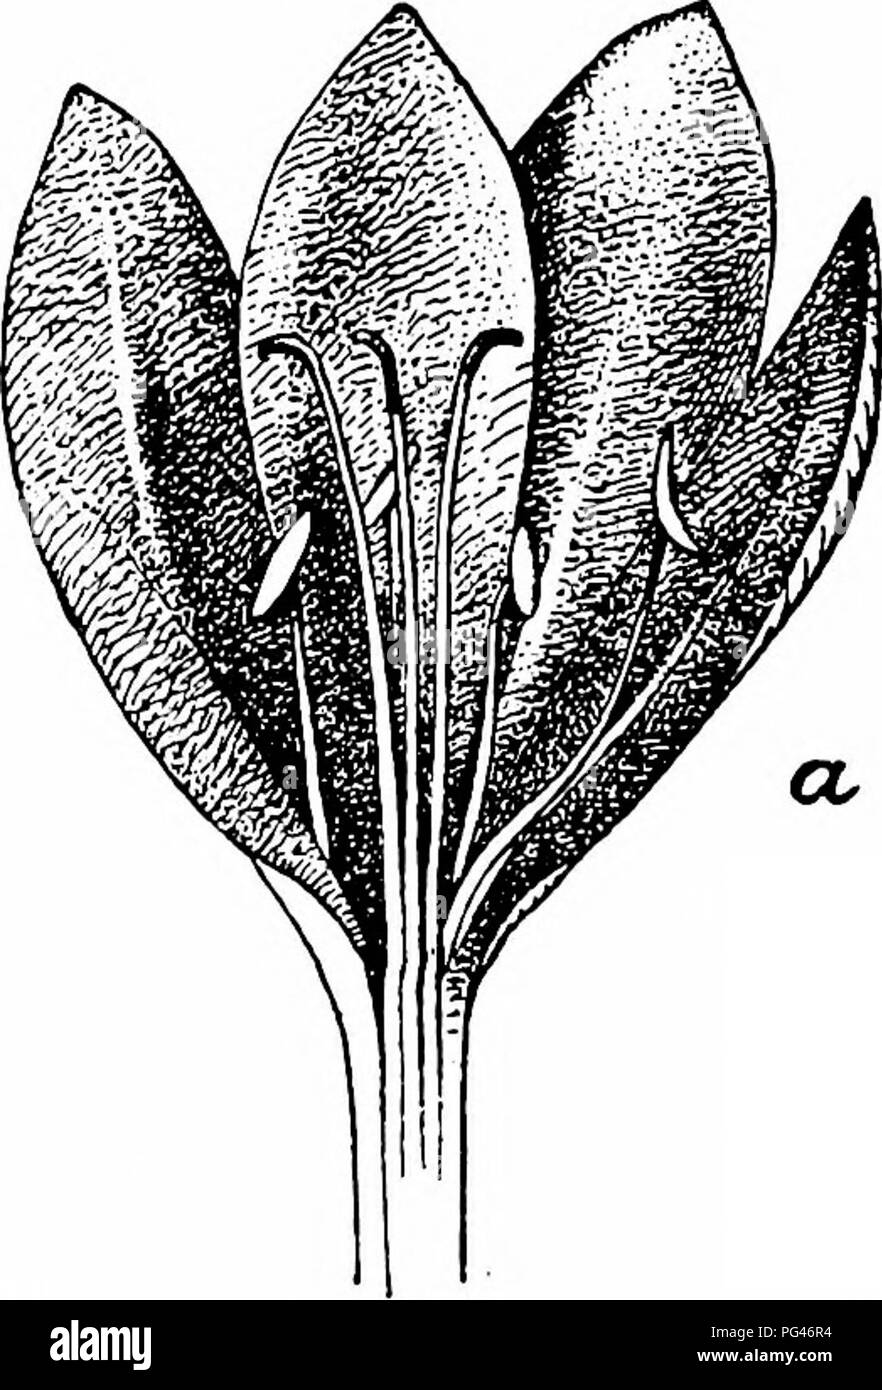 . Handbook of flower pollination : based upon Hermann Mu?ller's work 'The fertilisation of flowers by insects' . Fertilization of plants. LILIACEAE 471 2820. A. fastigiata Dryand.—(Wilson, op. cit.)—In this species autogamy is excluded. Artificial self-pollination is ineffective. 2821. 912. Aspidistra Ker-Gawl. A. elatior Blume.—Delpino regards this species as micromyophilous {c/. Vol. I, p. 15), but J. Wilson (Bibl. No. 3662) is of opinion that snails effect pollination ; these slip through small openings in the flowers and usually bring about autogamy. 913. Colchicum L. Protogynous flowers w Stock Photo